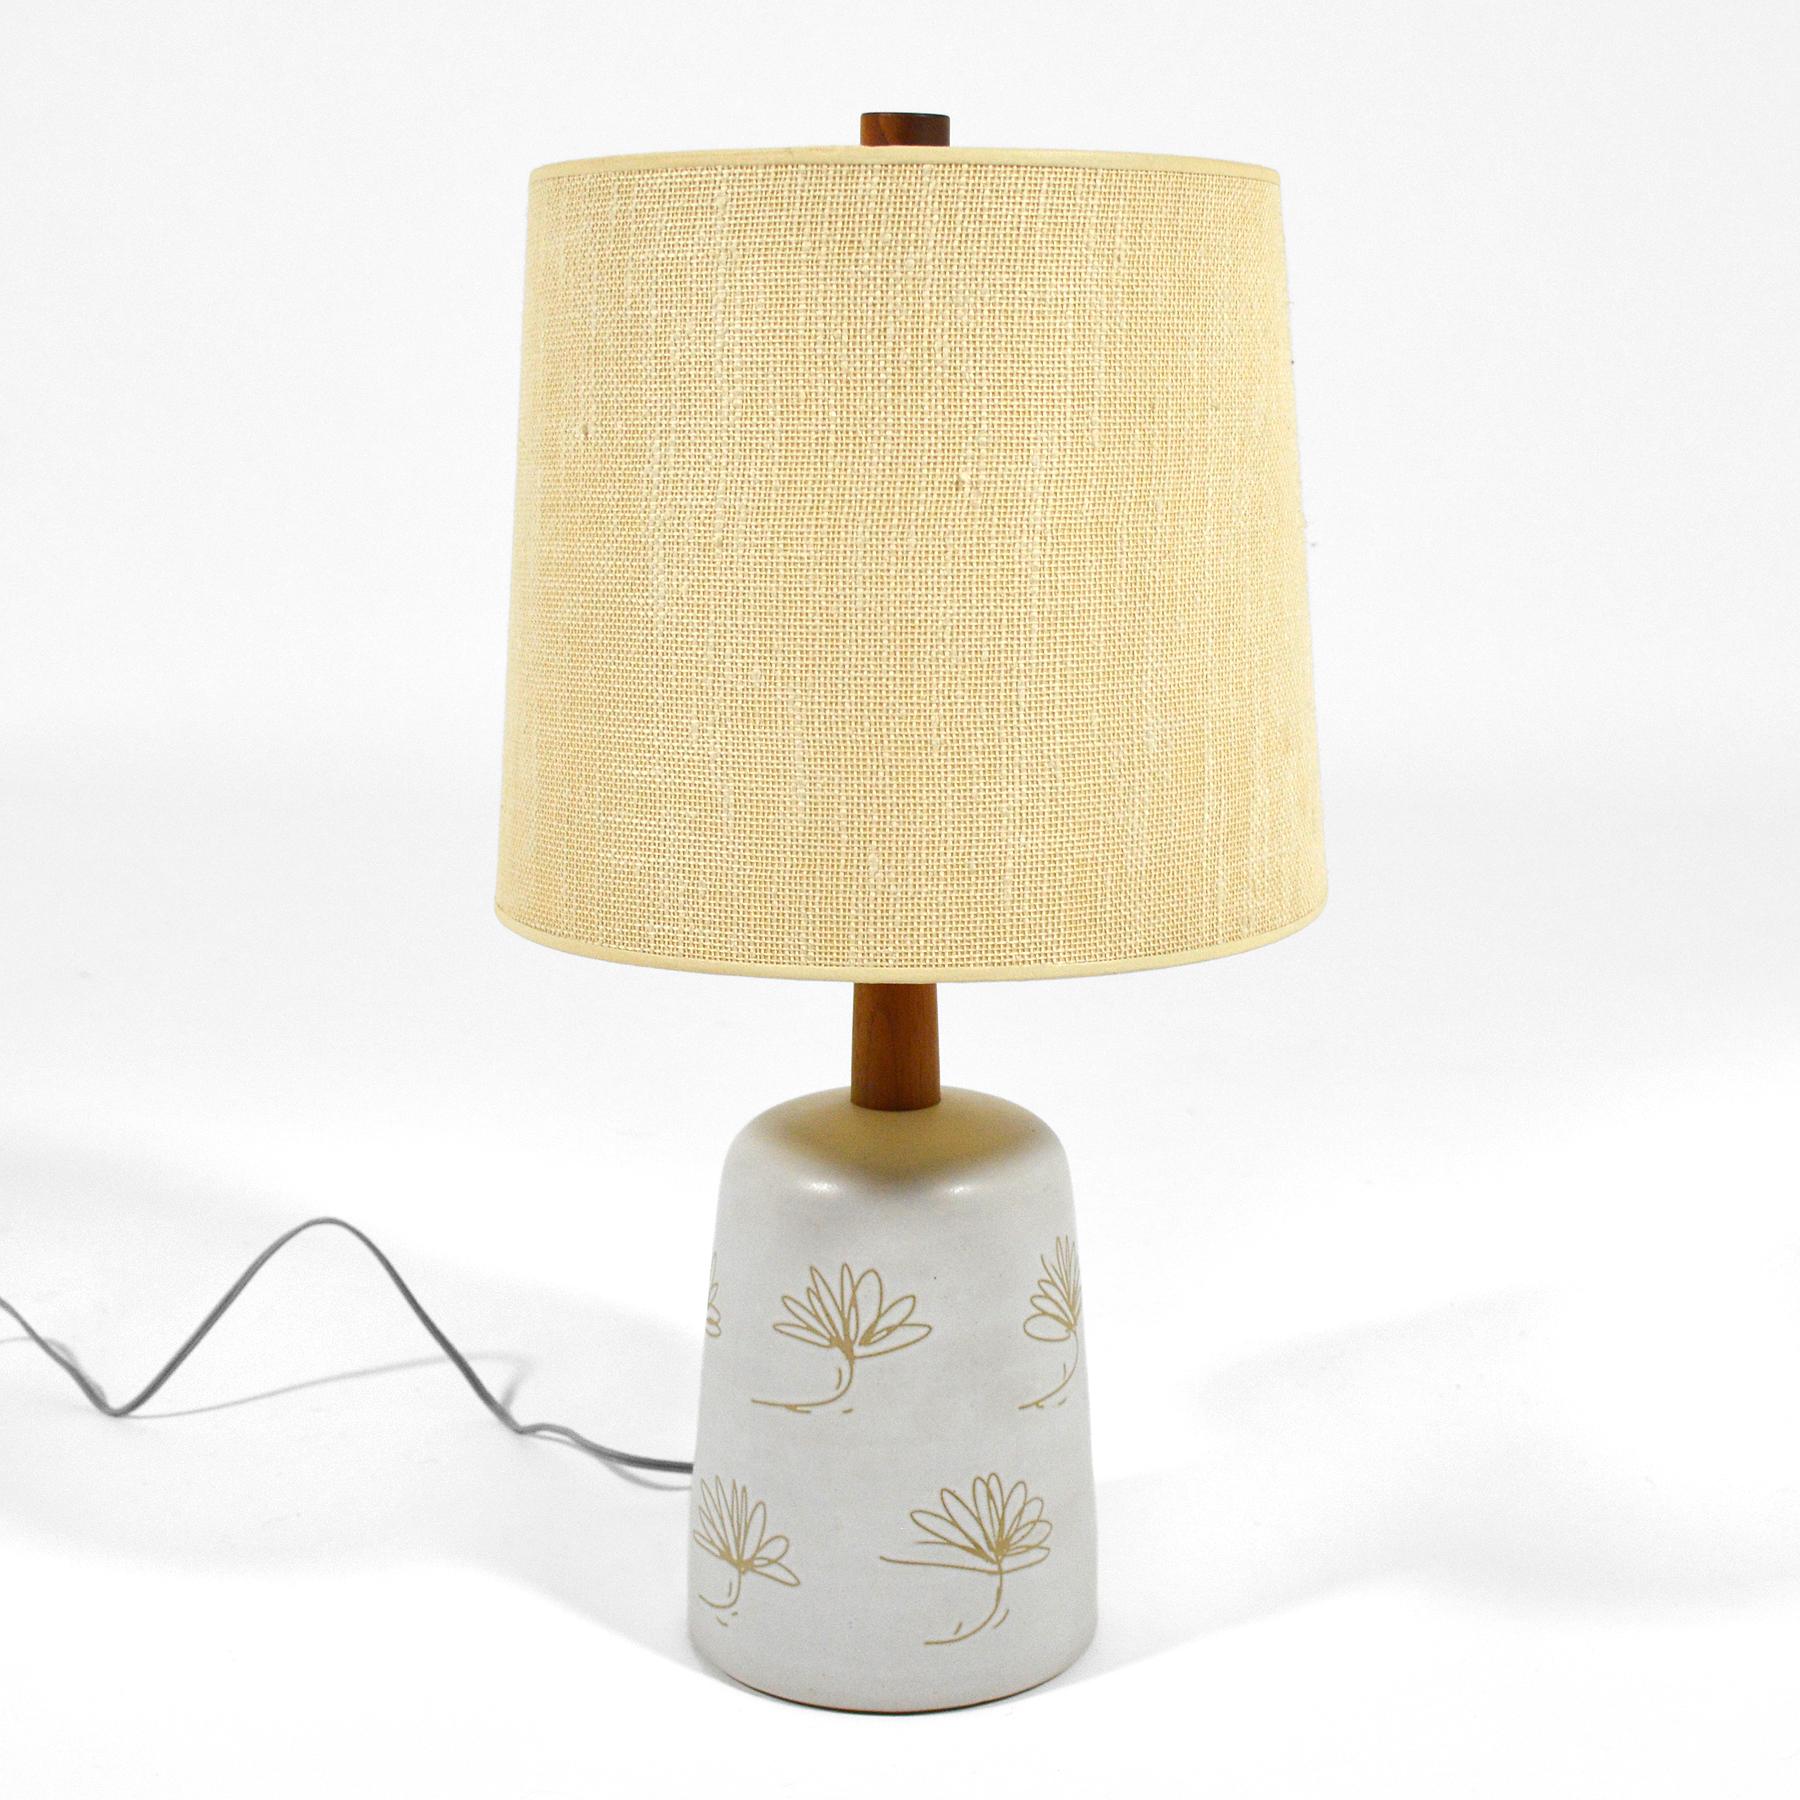 This terrific lamp by Gordon and Jane Marts for Marshall Studios features a delicate floral design rendered in sgraffito on the eggshell white glazed base. It retains its original shade and walnut finial.